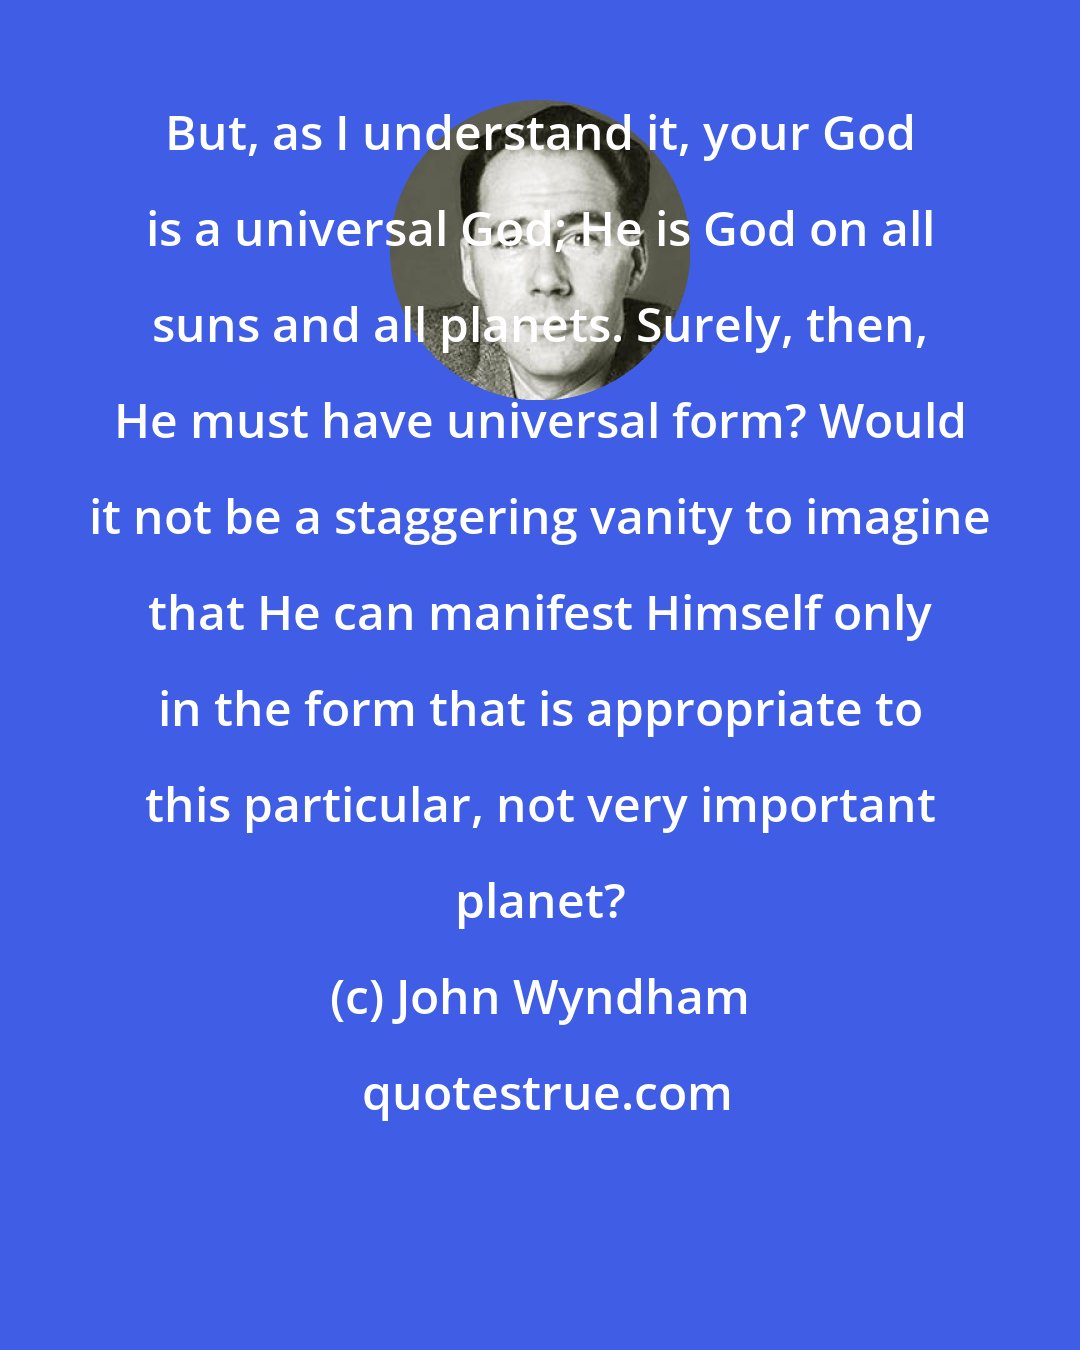 John Wyndham: But, as I understand it, your God is a universal God; He is God on all suns and all planets. Surely, then, He must have universal form? Would it not be a staggering vanity to imagine that He can manifest Himself only in the form that is appropriate to this particular, not very important planet?